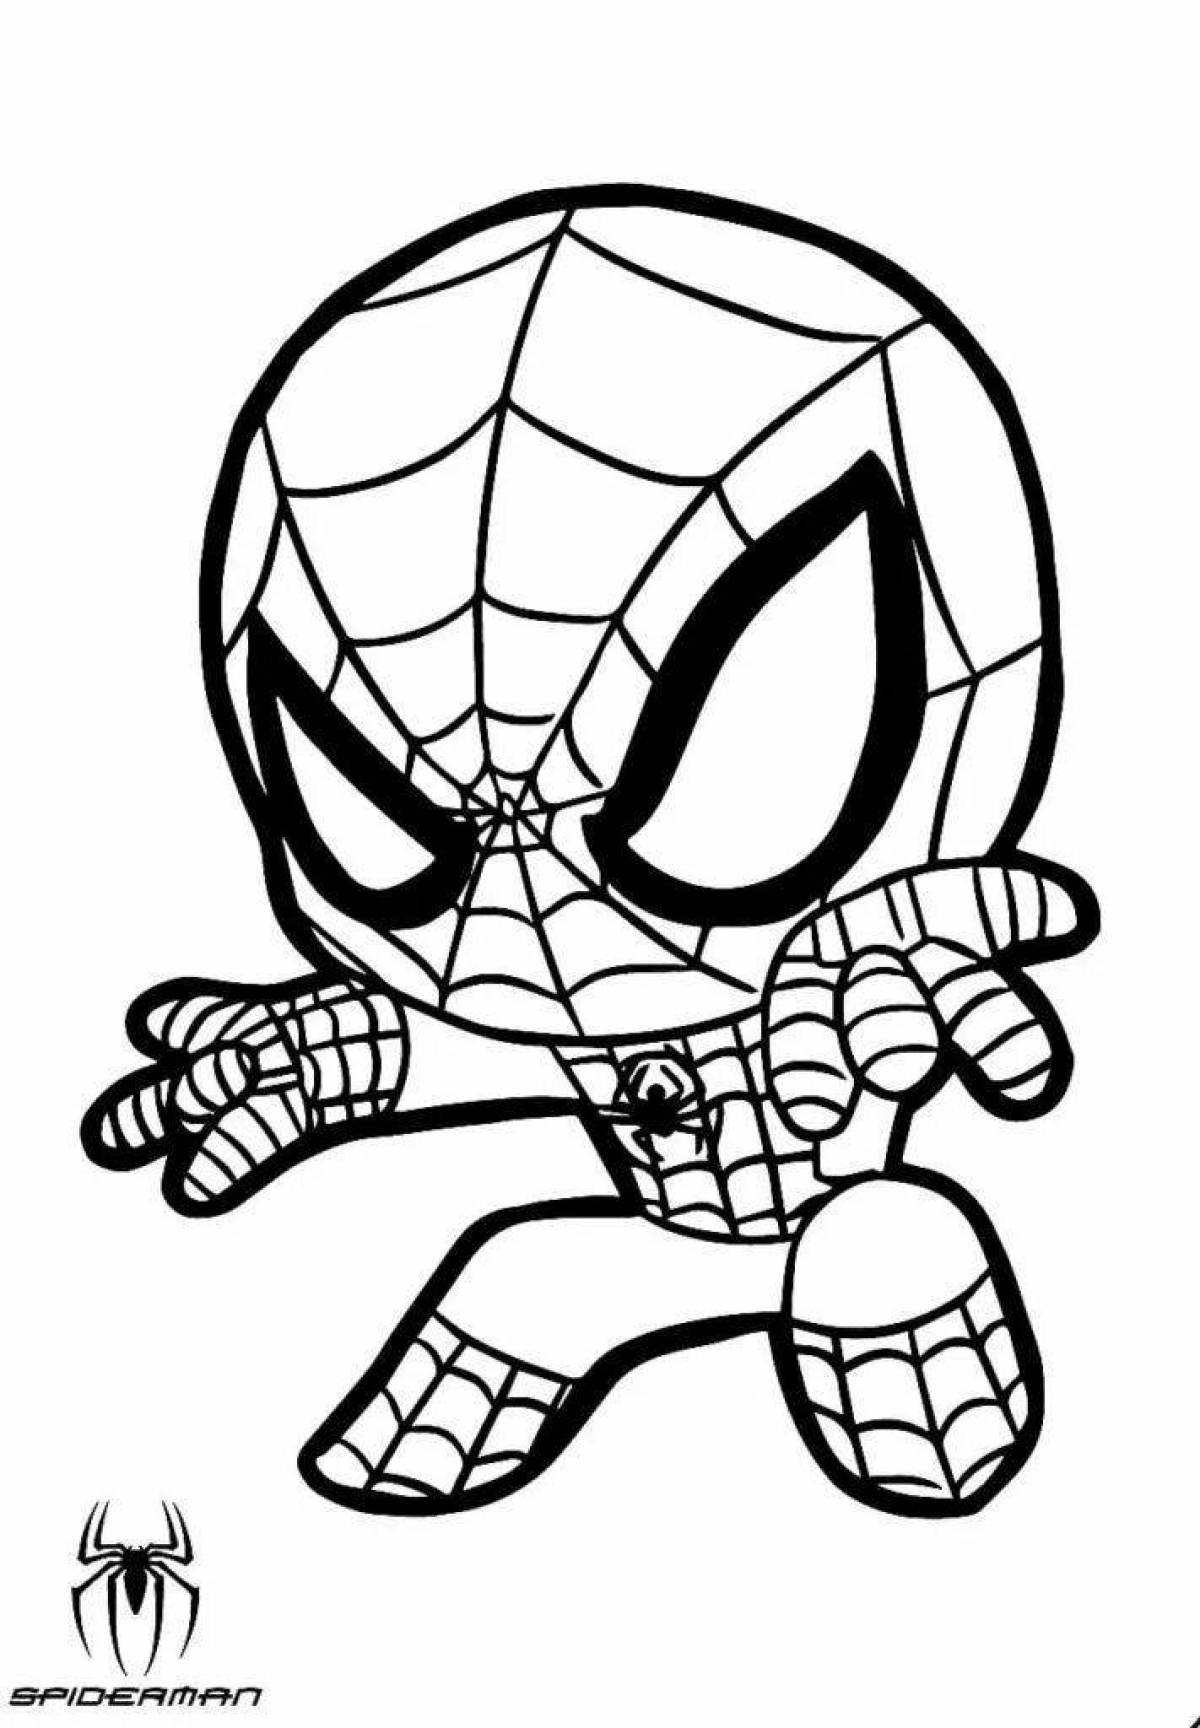 Exquisite drawing of spiderman